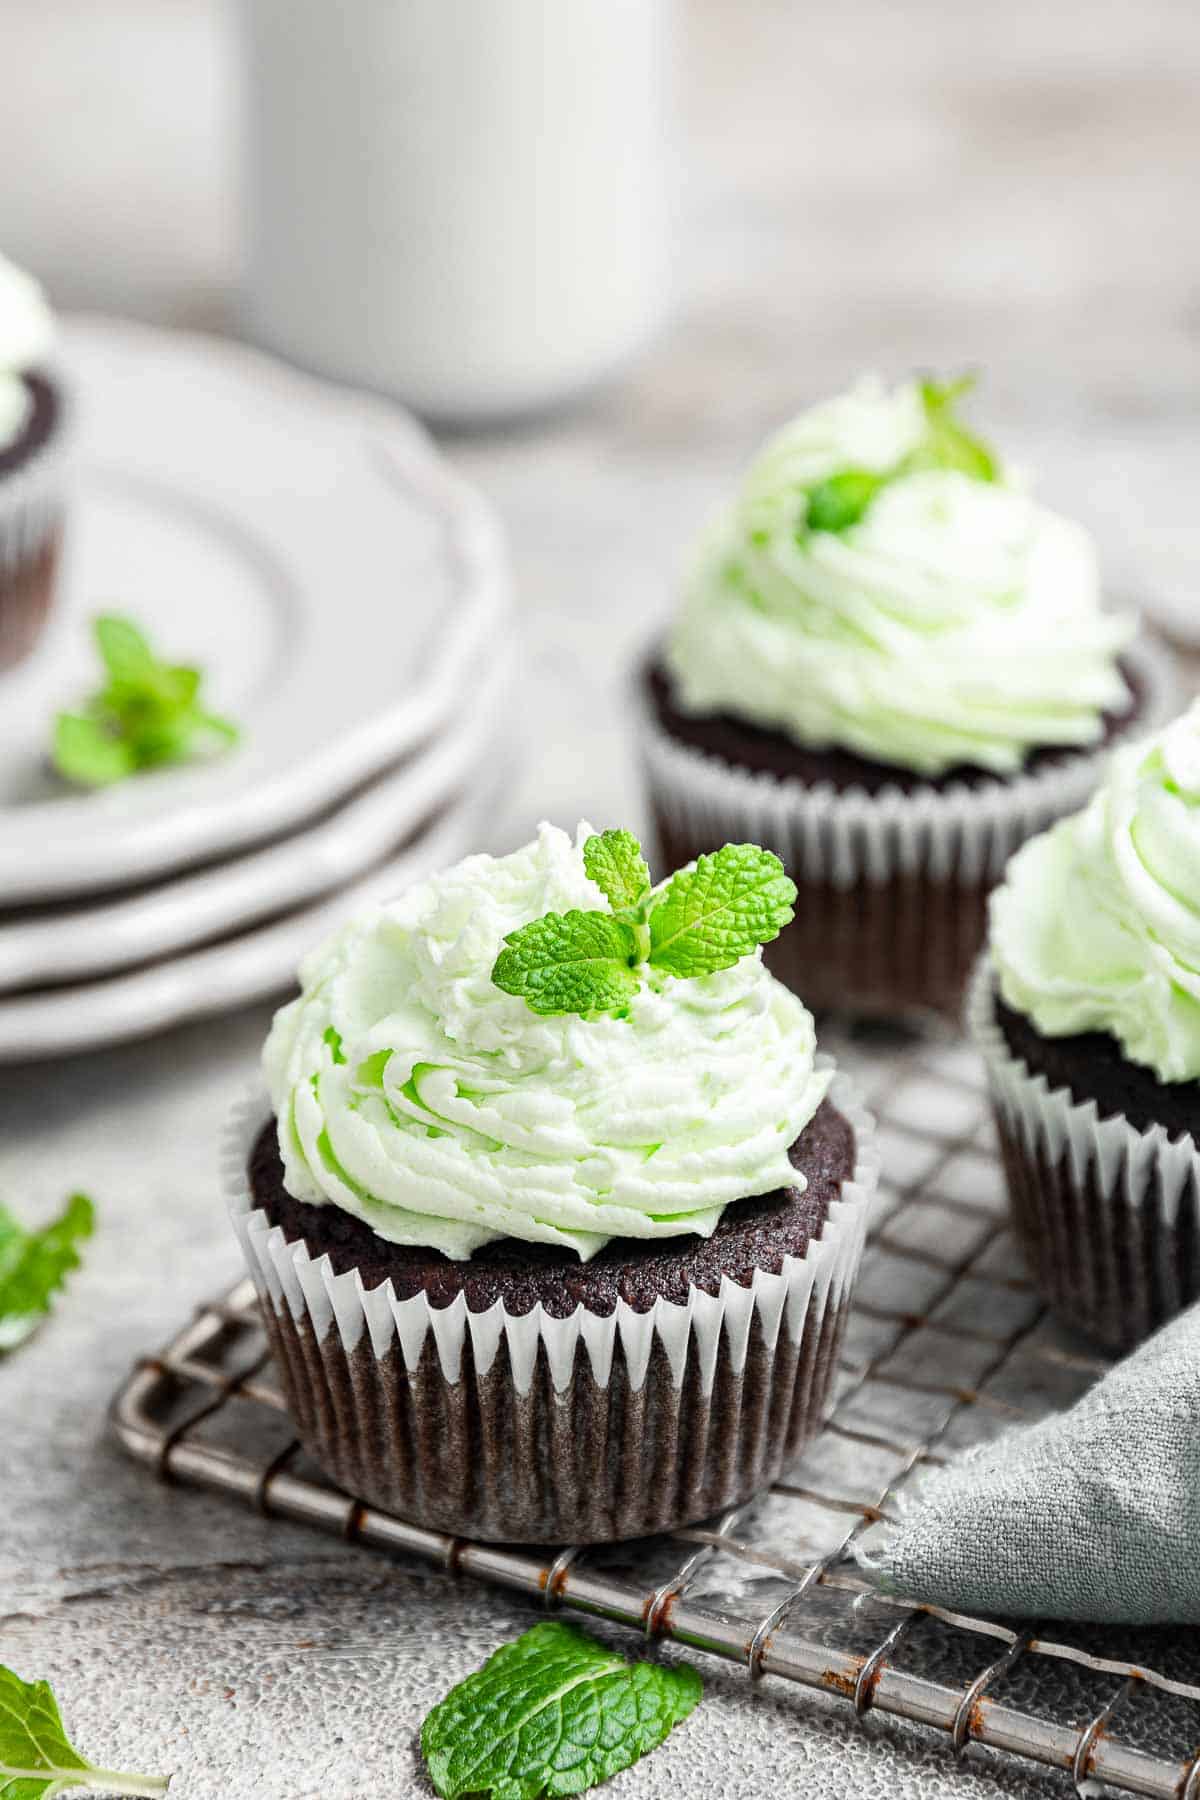 Chocolate cupcakes with green mint buttercream frosting and a fresh mint leaf.